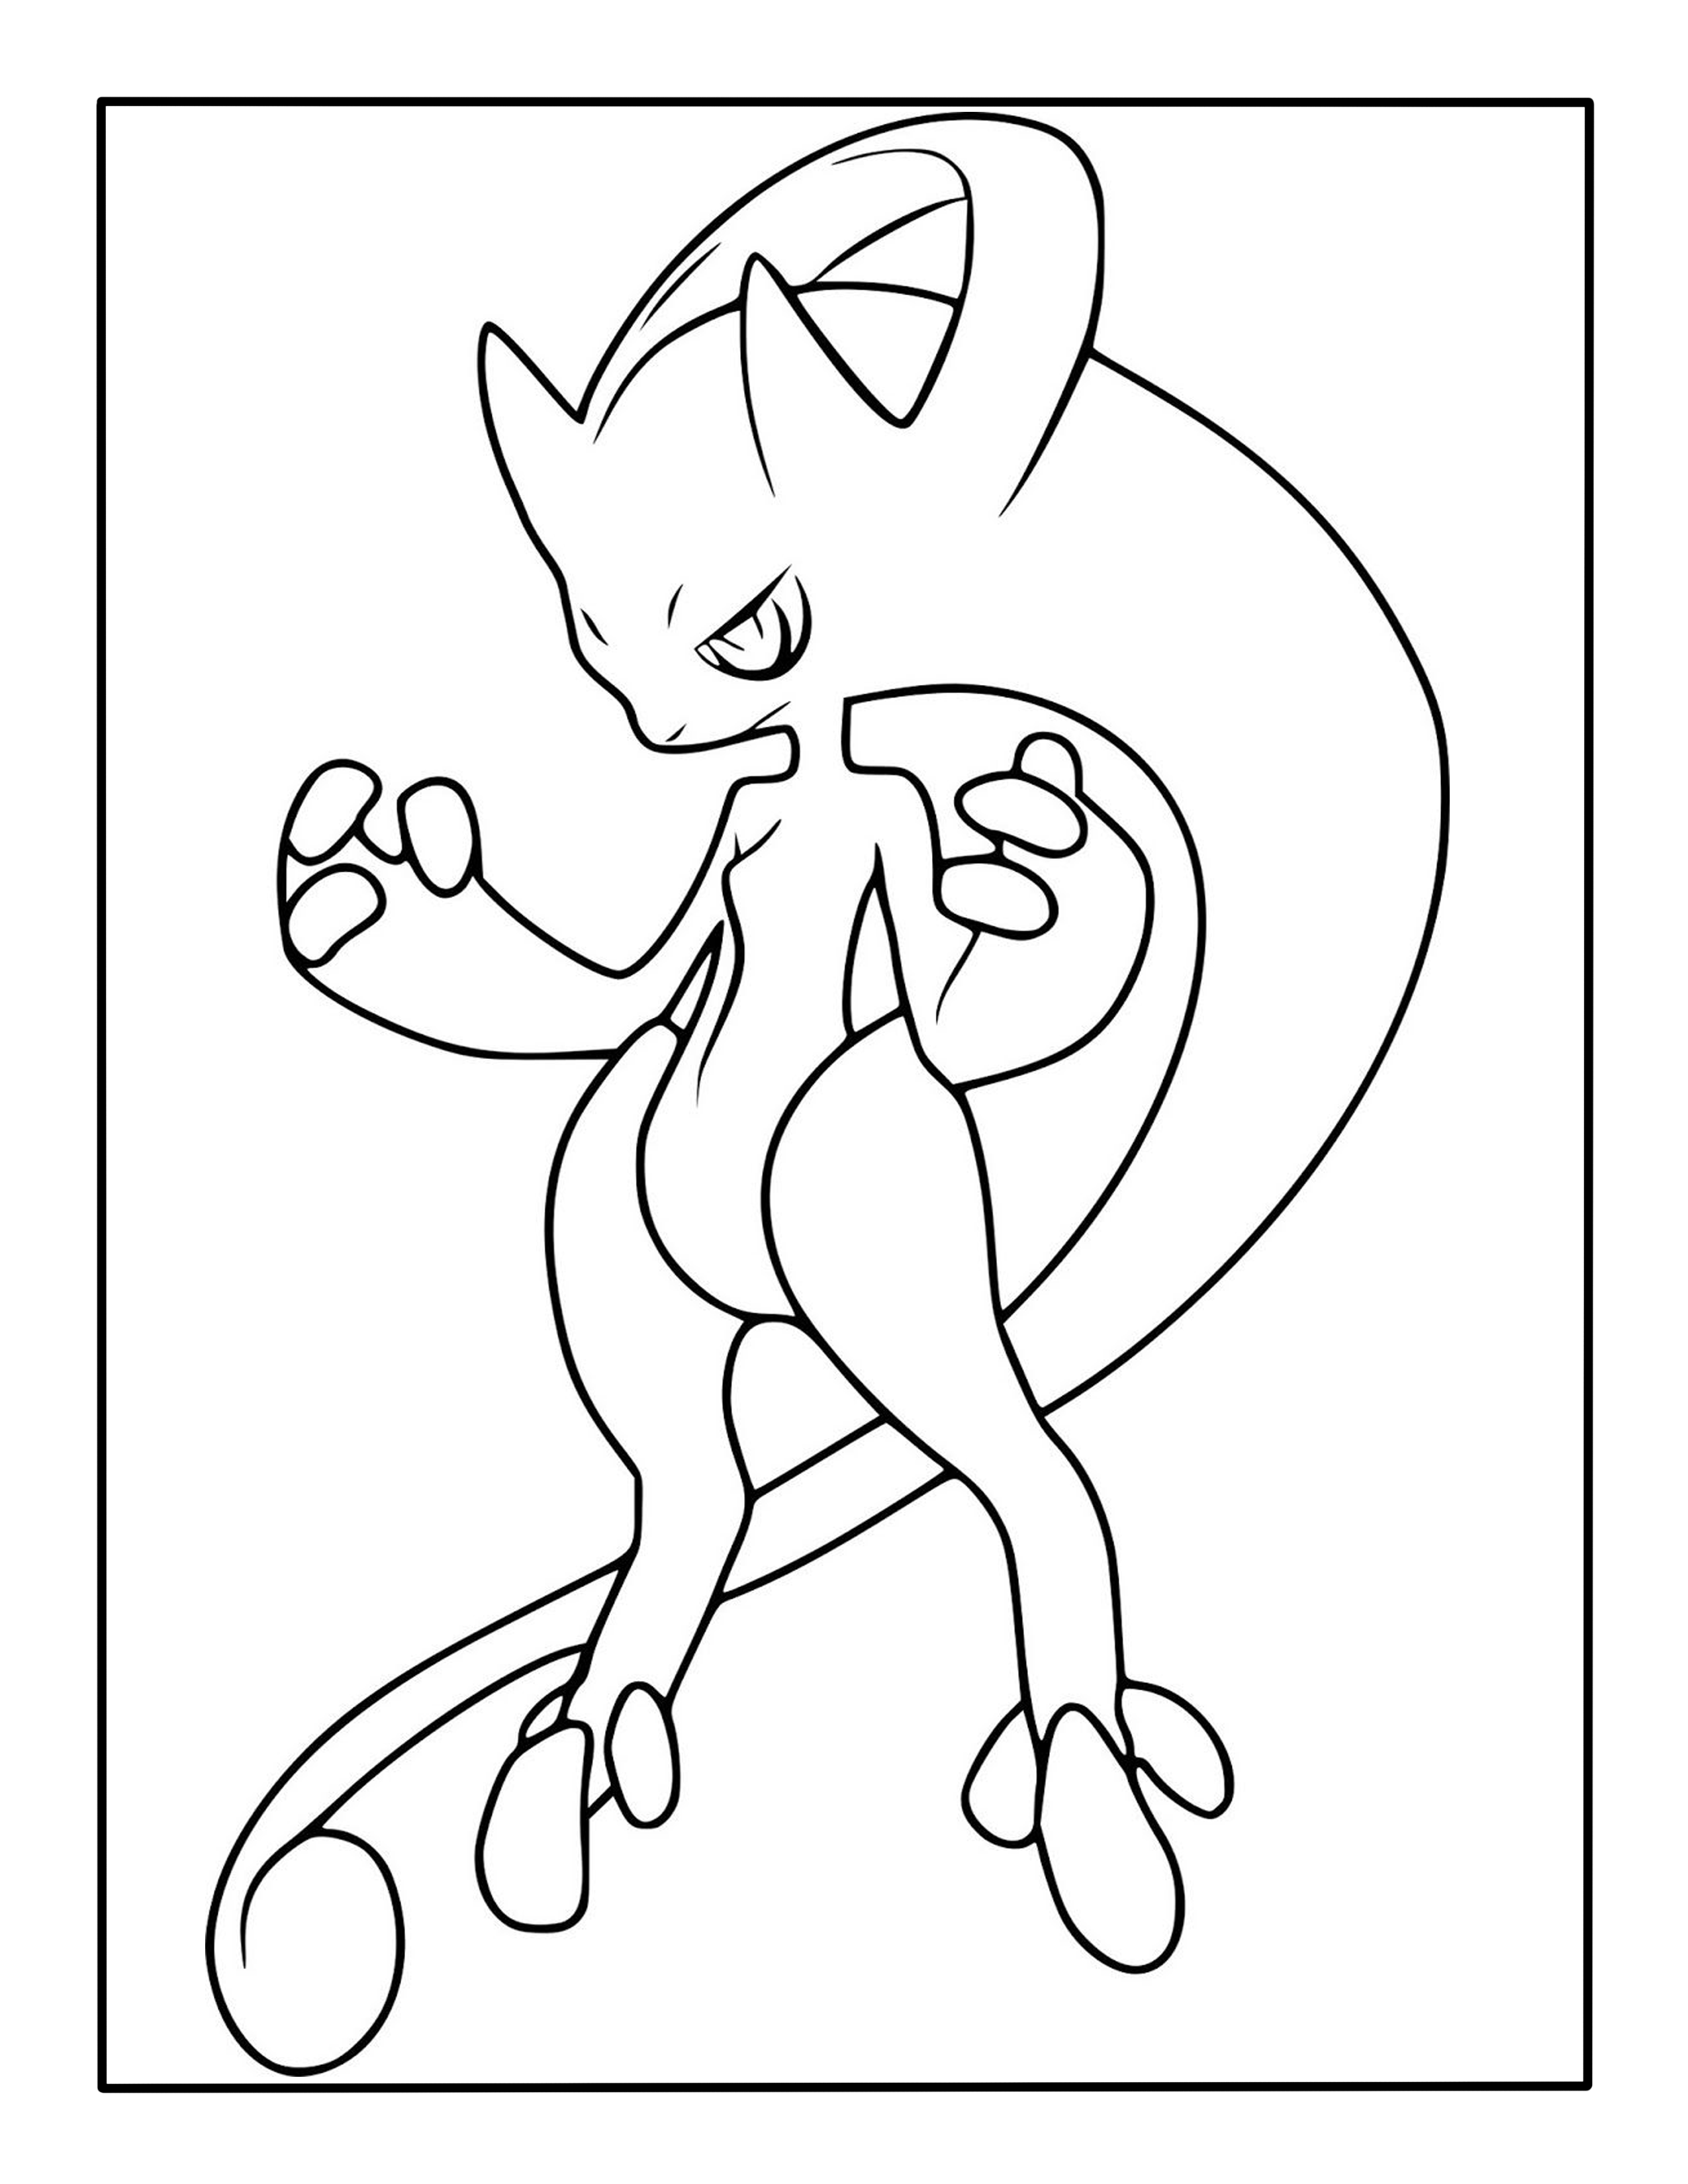 Mewtwo coloring page â kimmi the clown